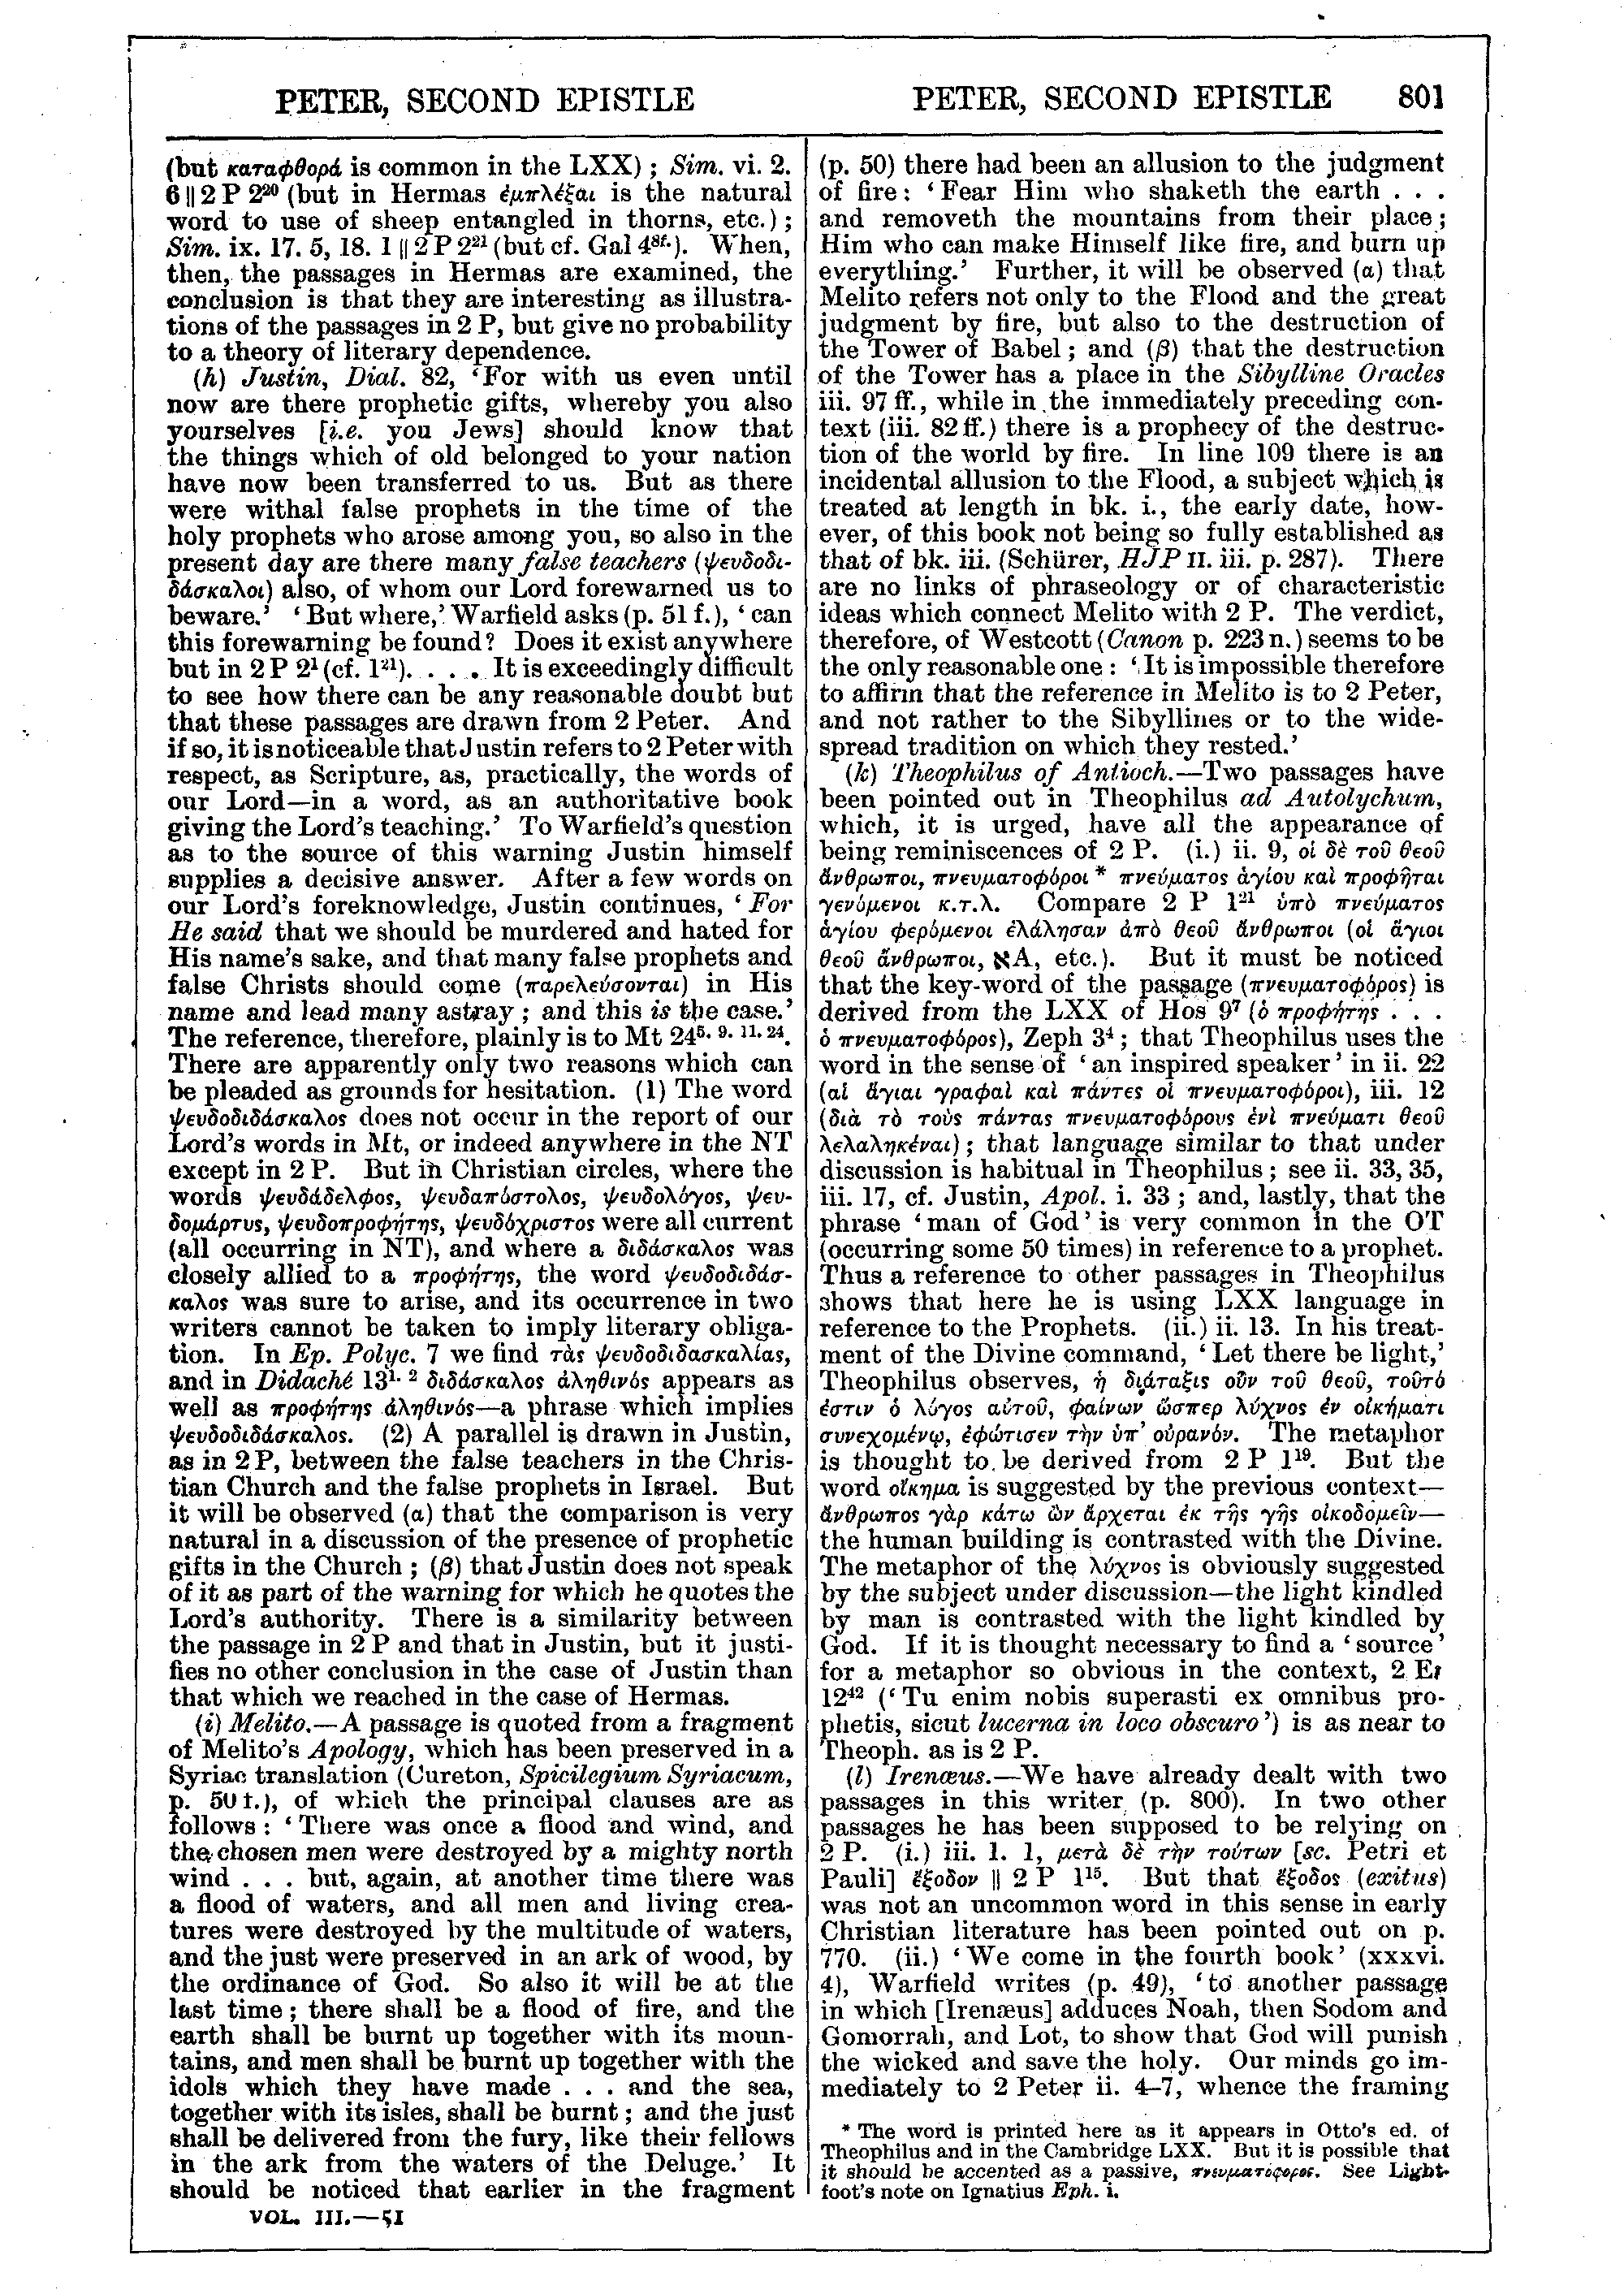 Image of page 801